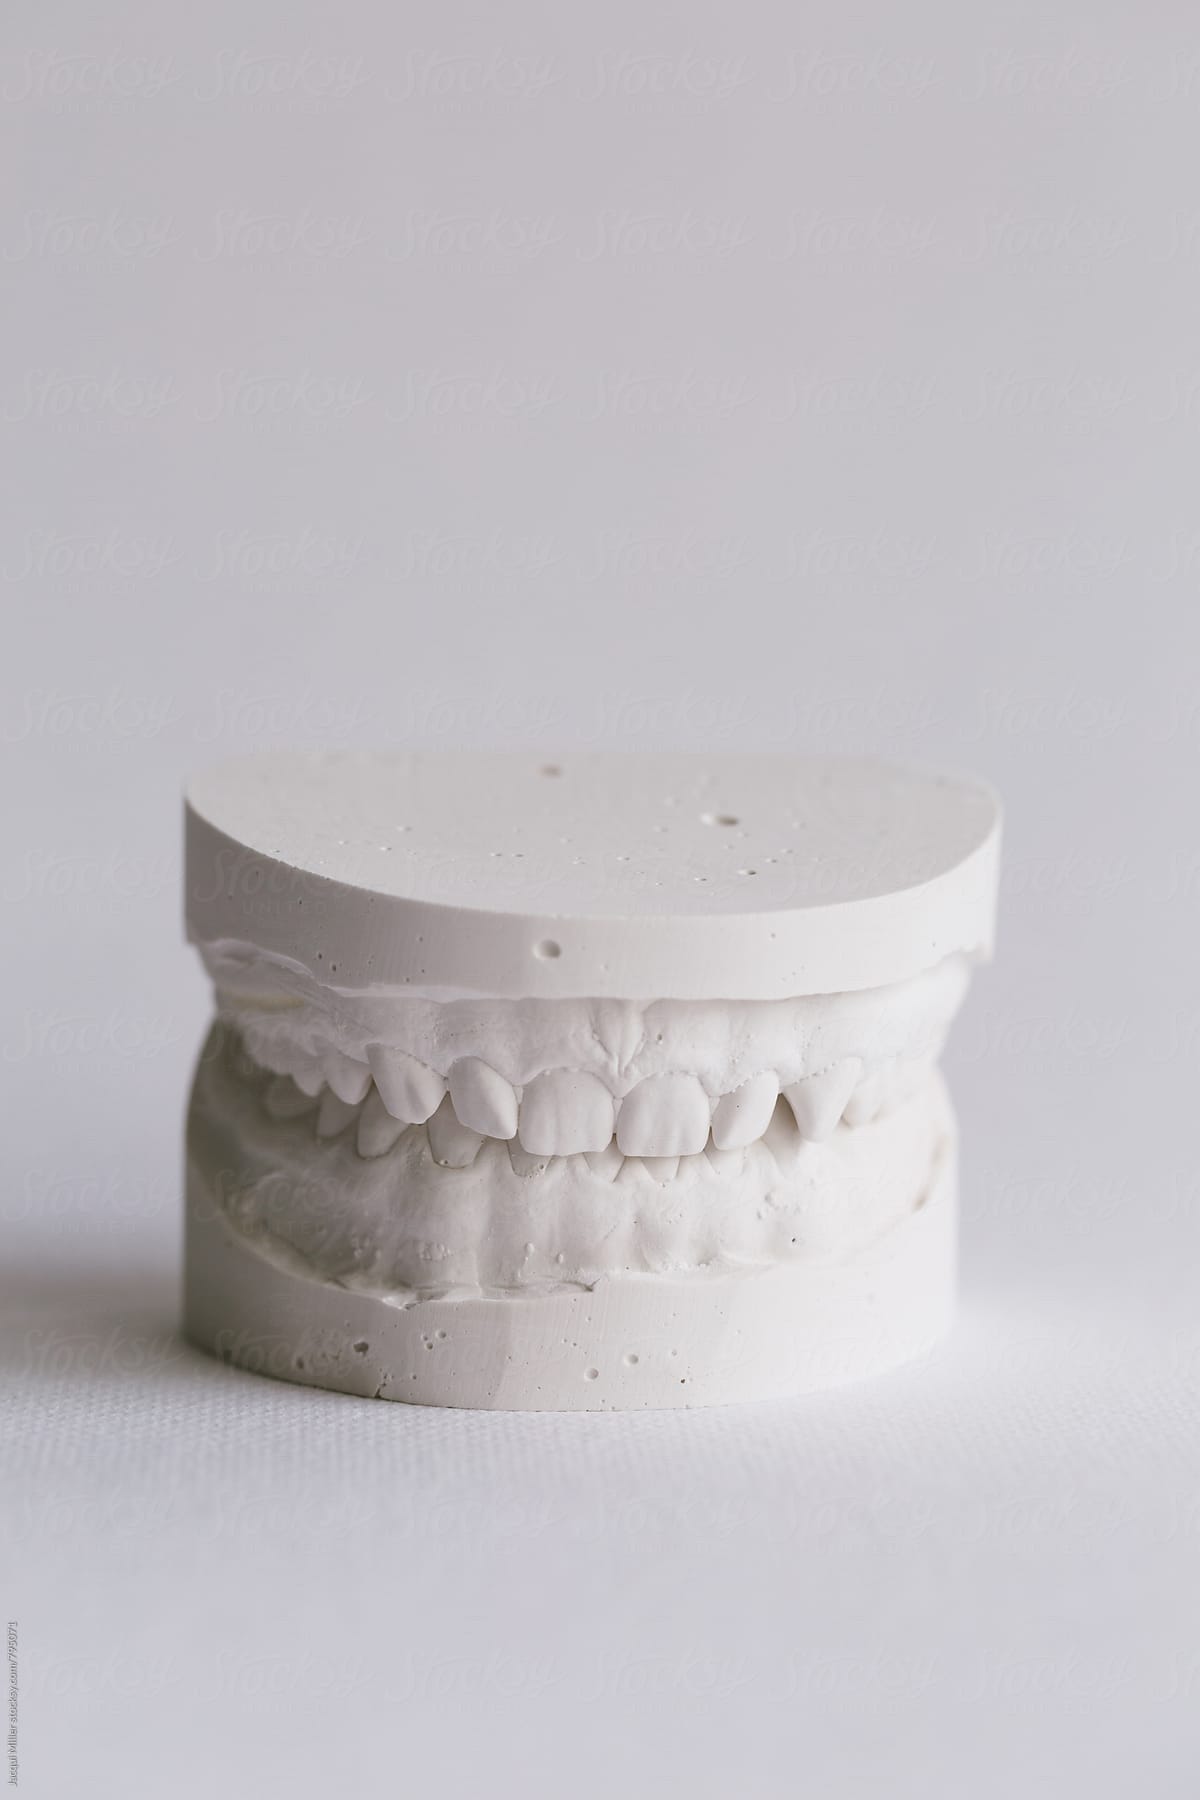 Plaster models of upper and lower teeth